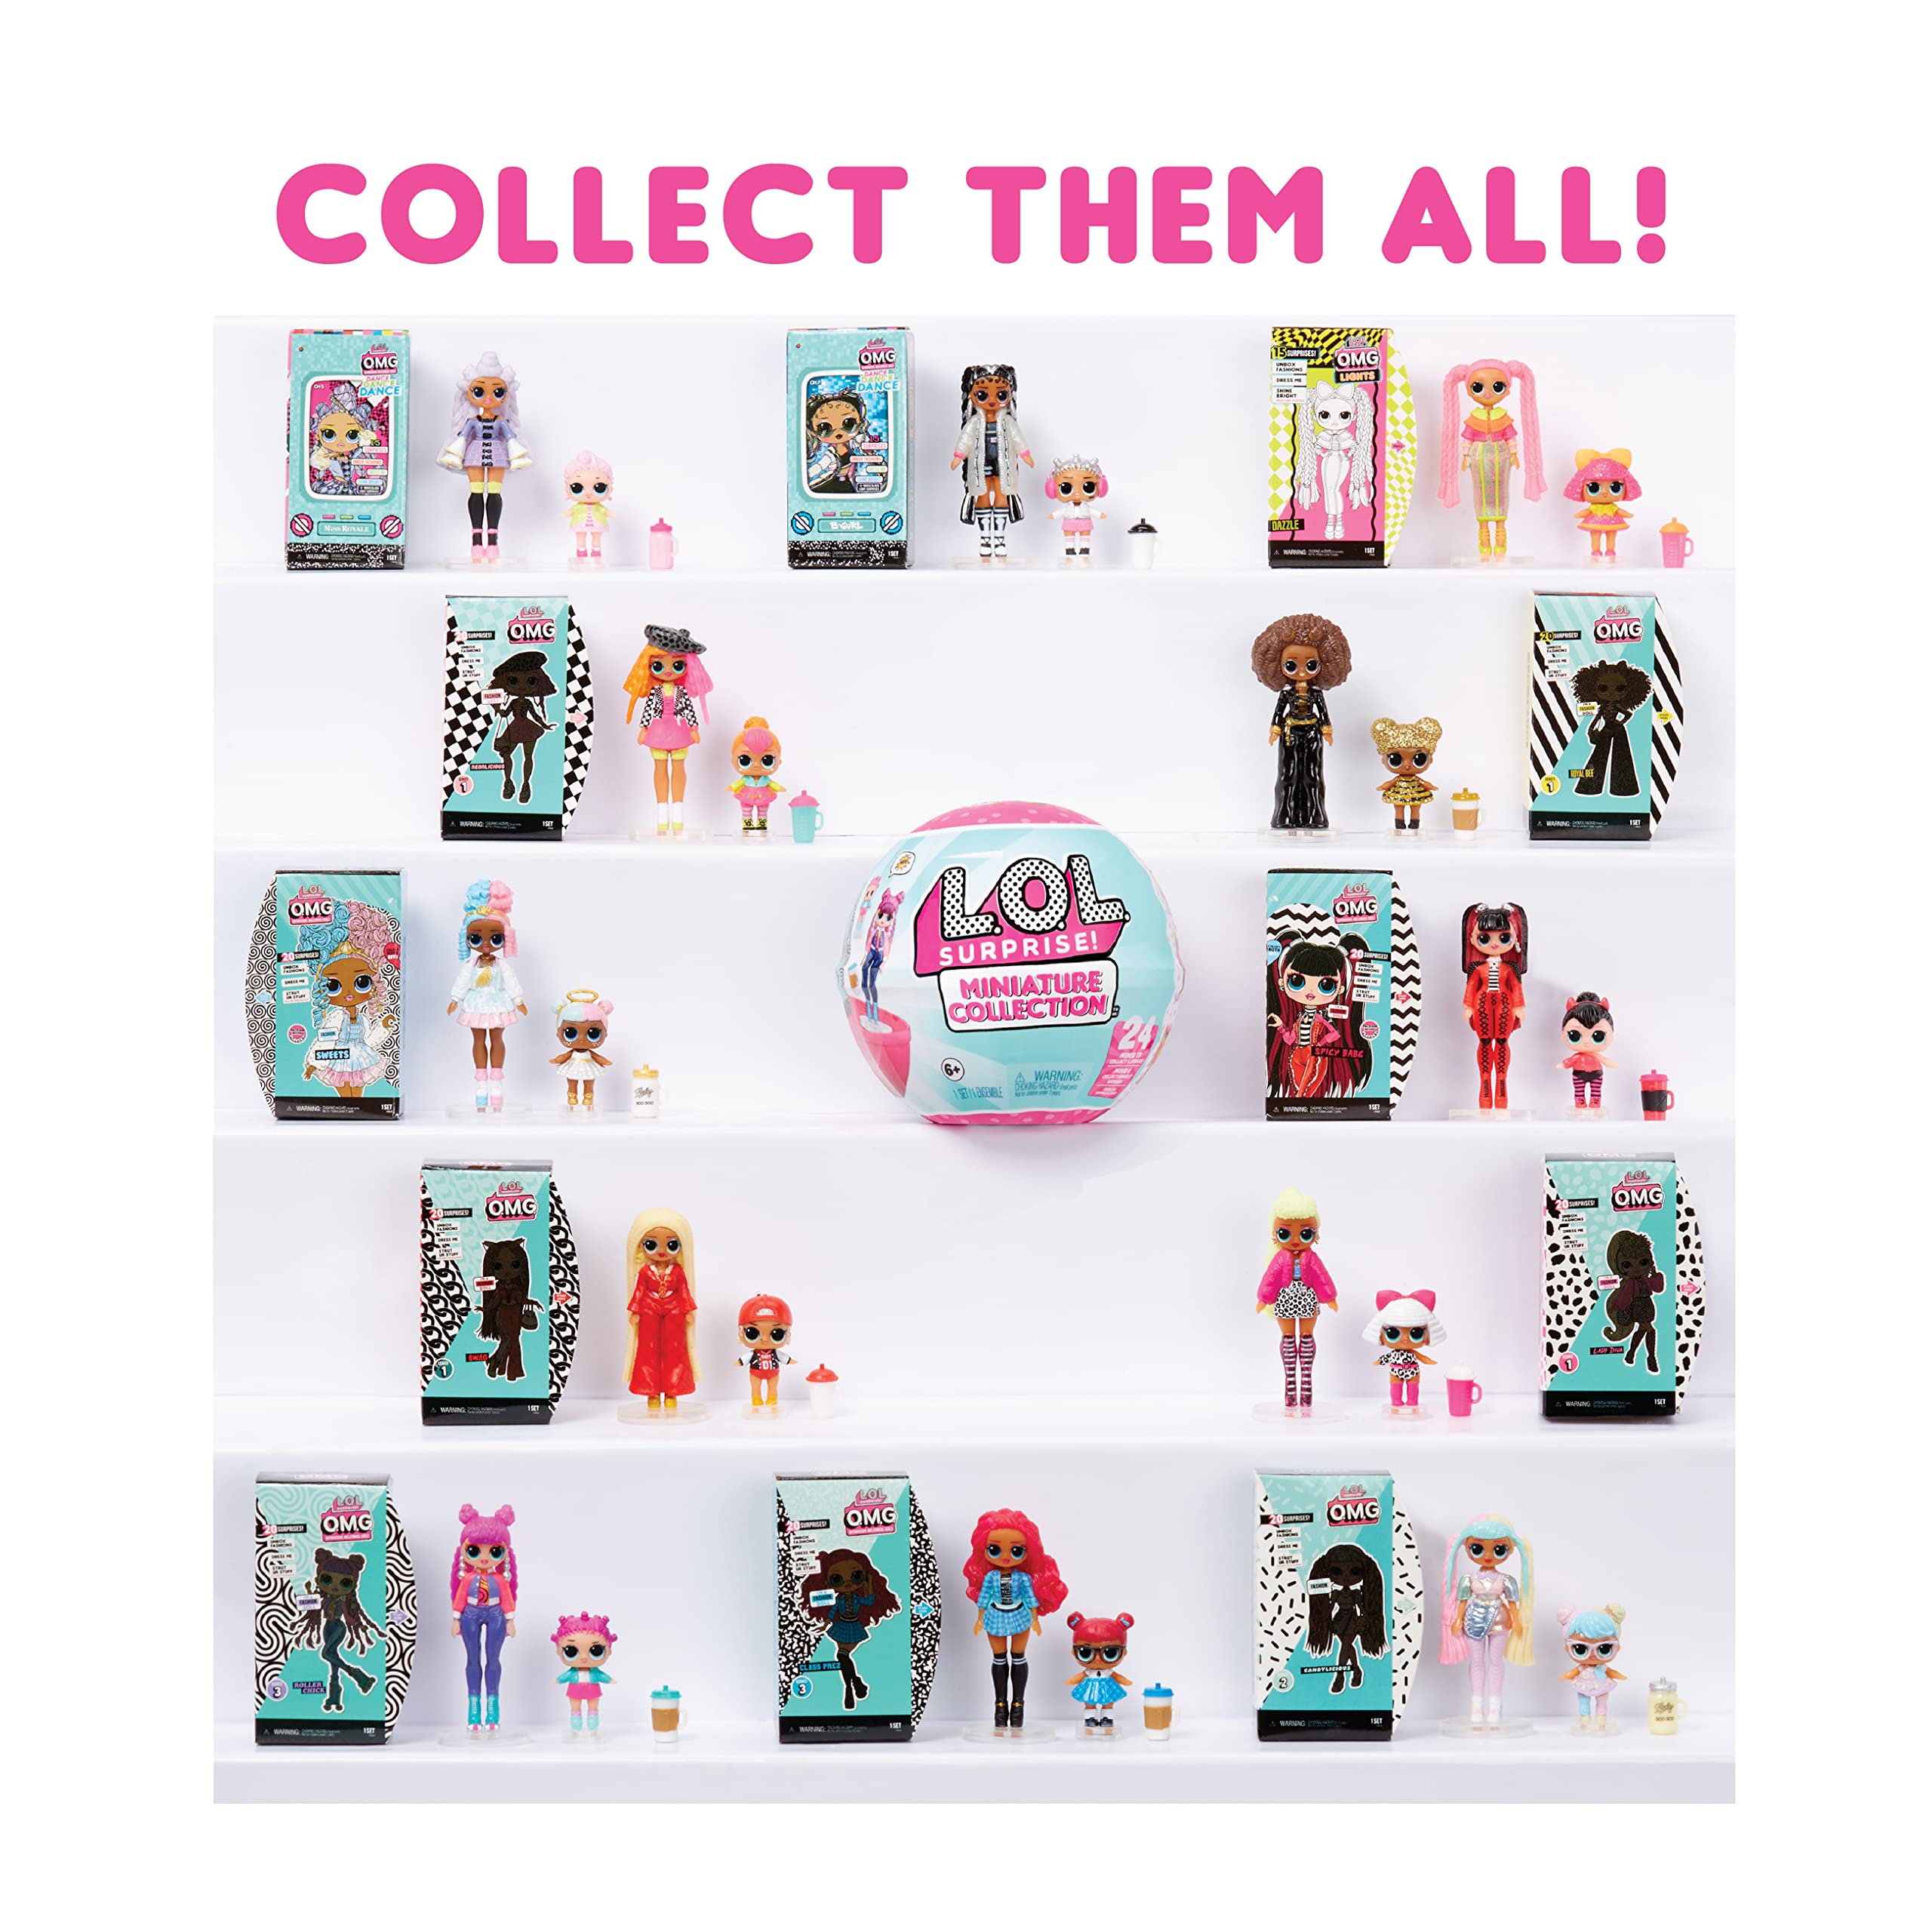 MGA Entertainment Miniature Collection with Collectible Dolls, Miniature OMG Fashion Doll, Miniature LOL Doll, Miniature Dolls, Accessories, Limited Edition Doll, Mini Packaging - Gift Girls Age 4+